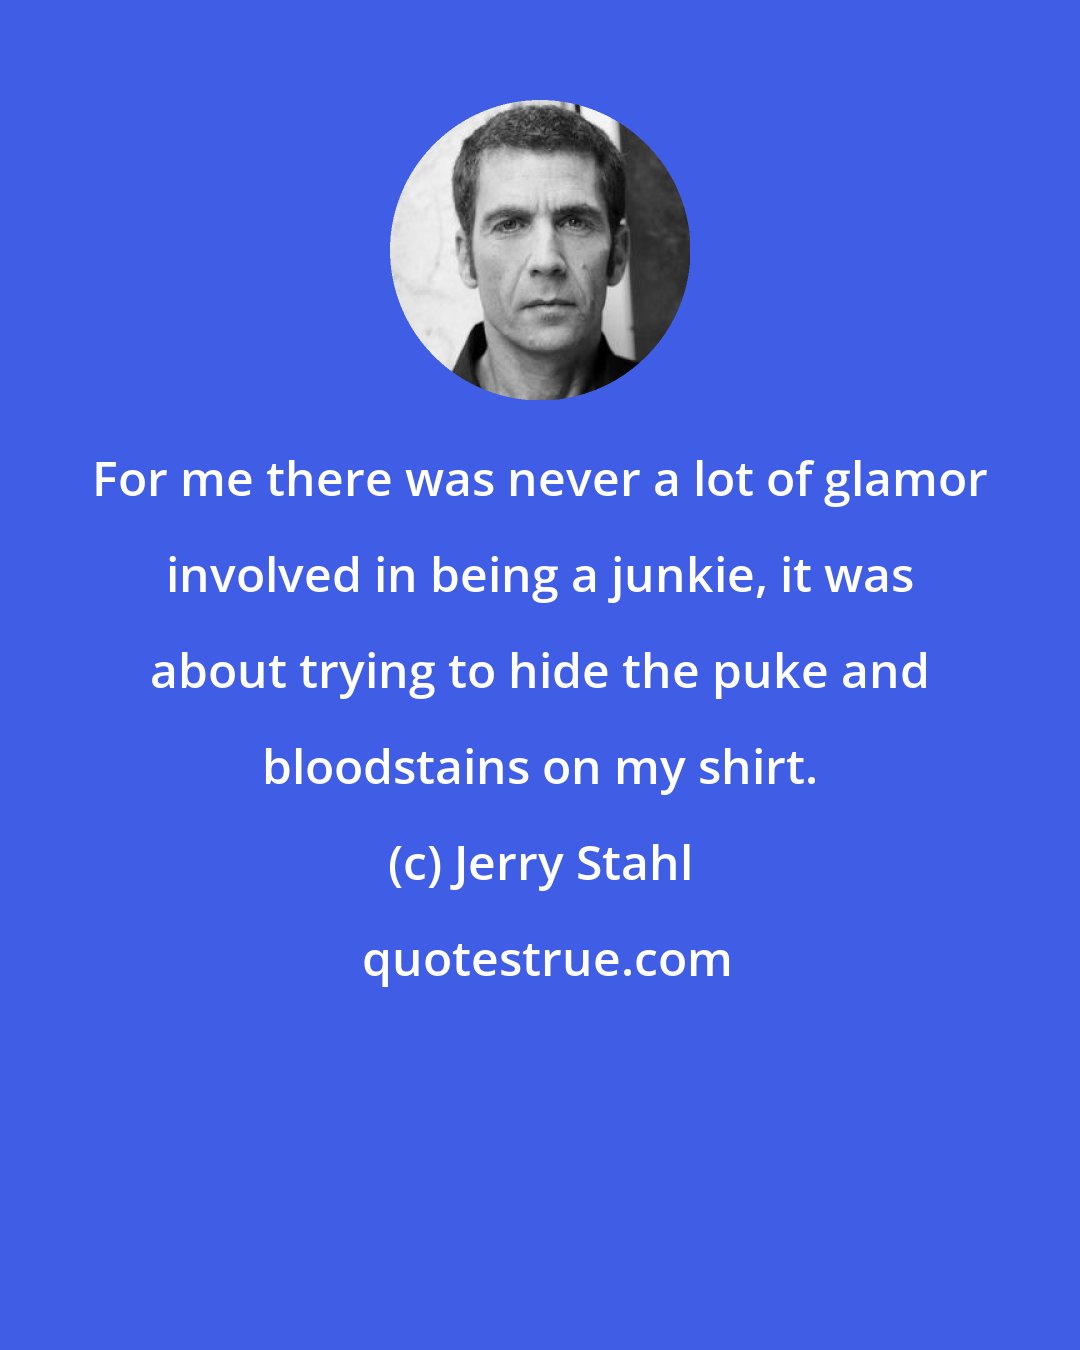 Jerry Stahl: For me there was never a lot of glamor involved in being a junkie, it was about trying to hide the puke and bloodstains on my shirt.